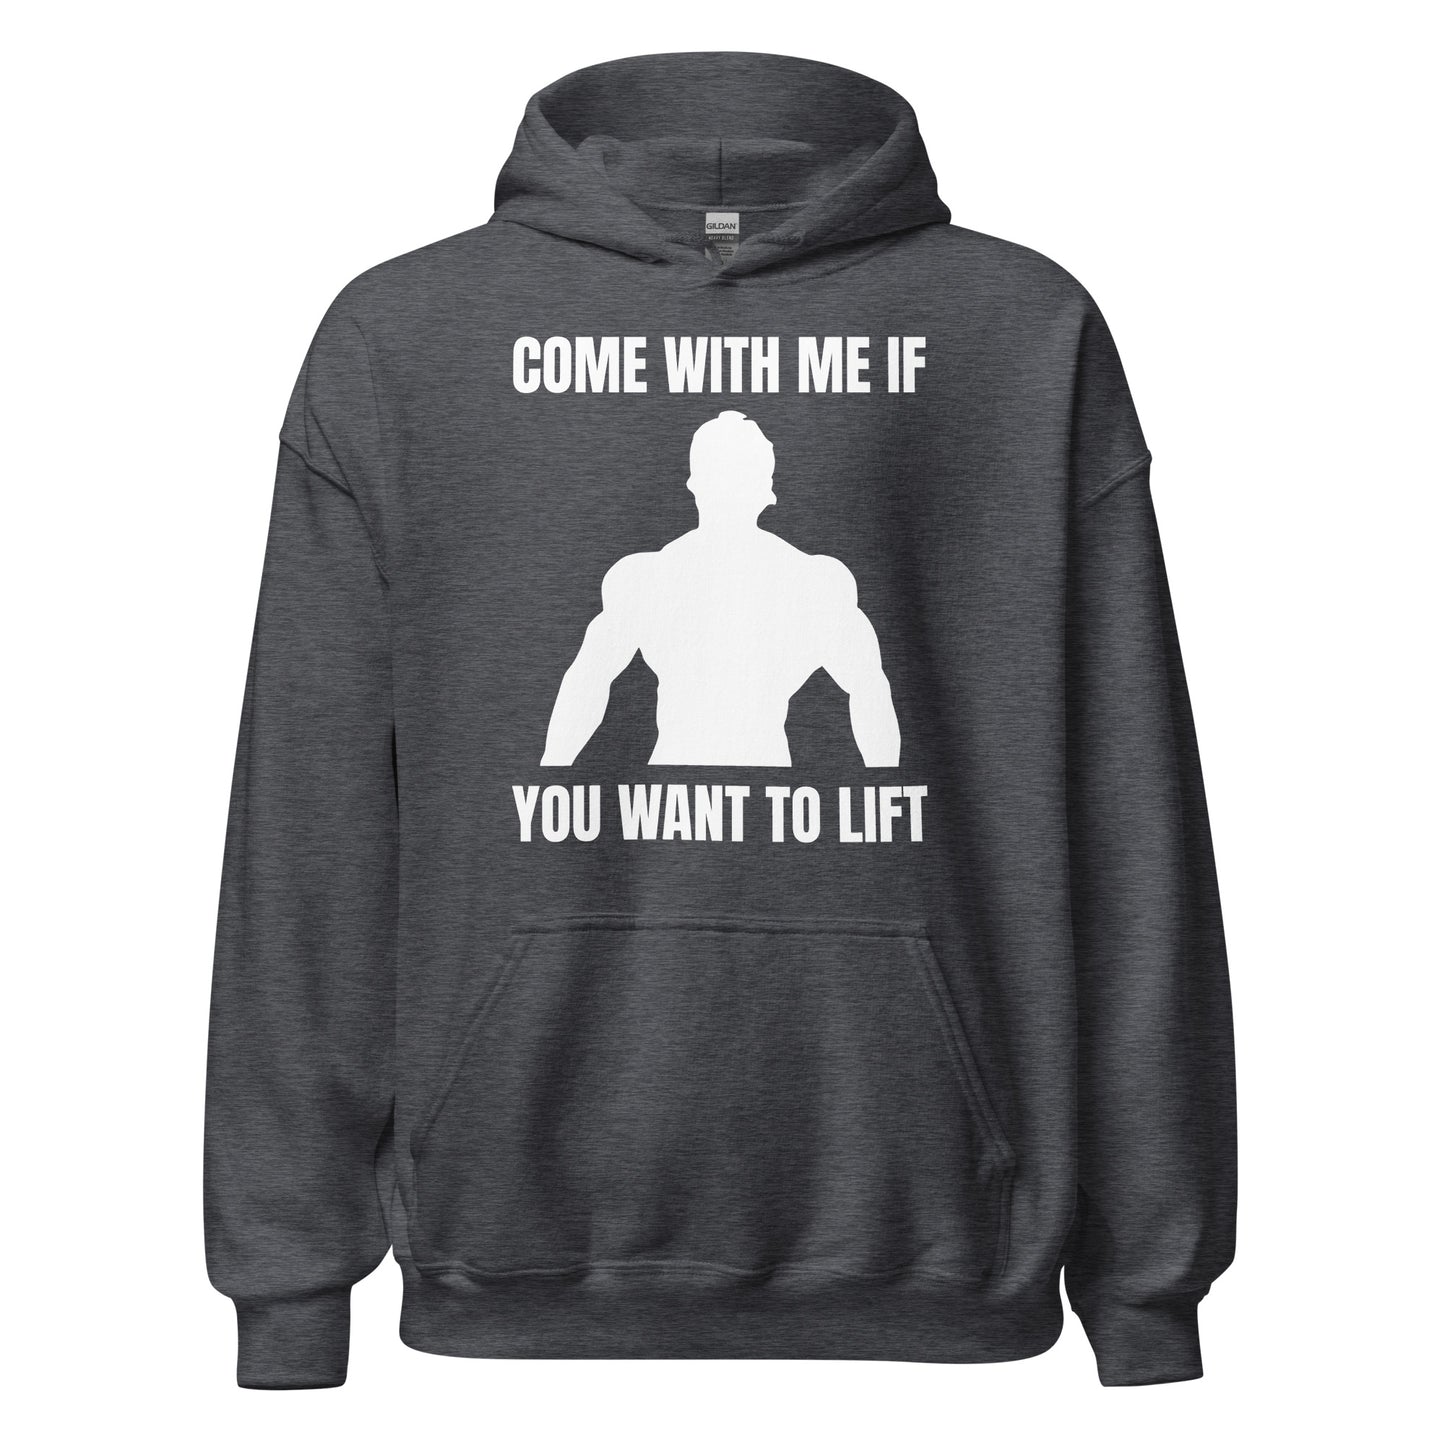 Come with Me if You Want to Lift Hoodie in Dark Heather